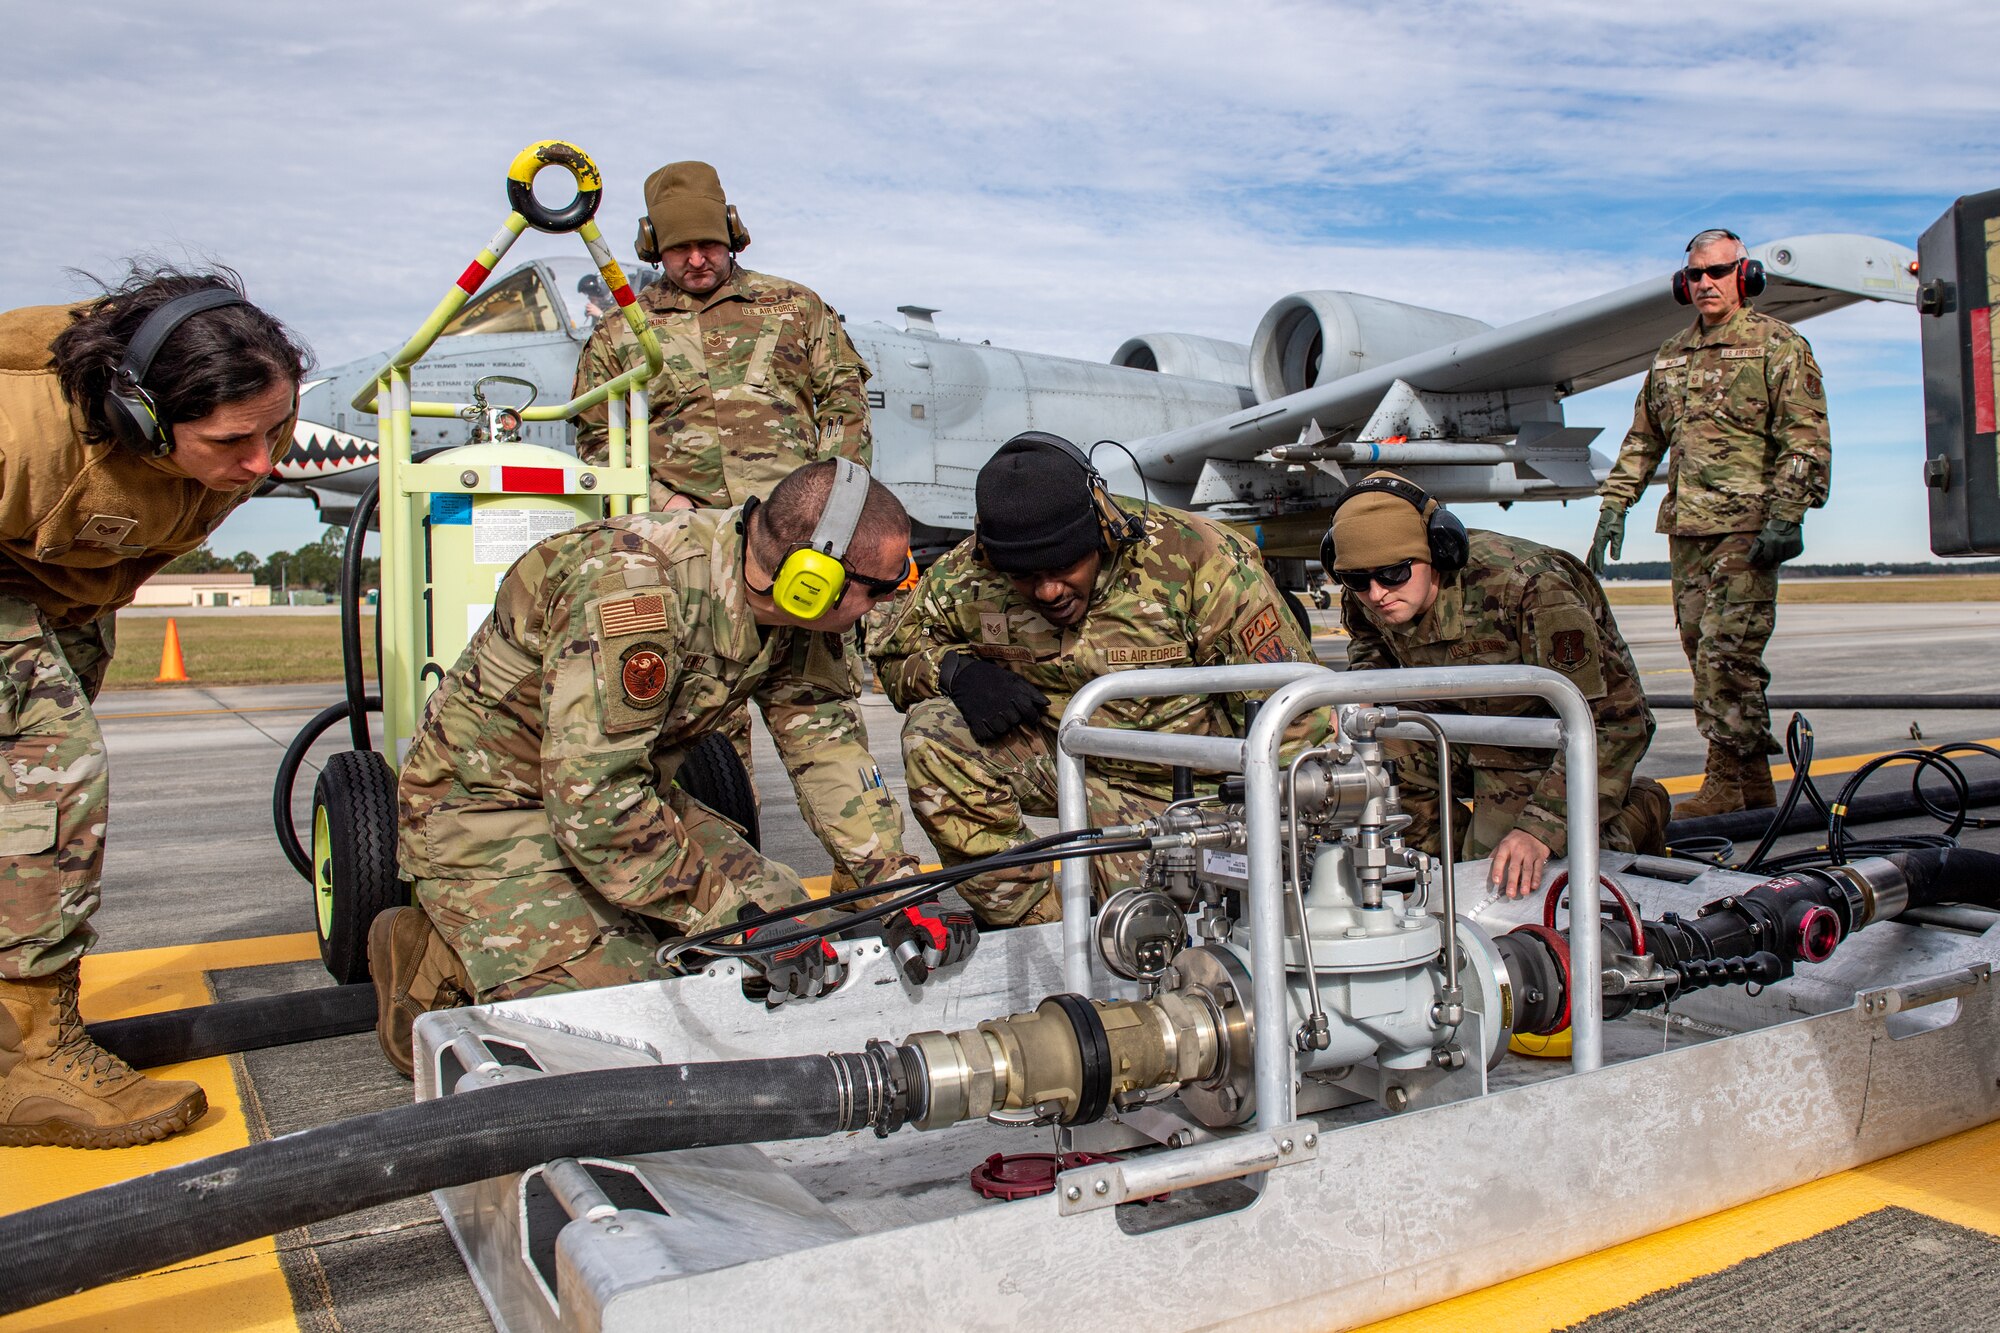 U.S. Air Force Airmen assigned to the 23rd Logistics Readiness Squadron train Guardsmen assigned to the 158th Fighter Squadron on the Versatile Integrating Partner Equipment Refueling (VIPER) kit at Moody Air Force Base, Georgia, Dec. 13, 2023. The VIPER kit is an adapter that allows hot refuel operations while an aircraft still has engines running. (U.S. Air Force photo by Senior Airman Courtney Sebastianelli)